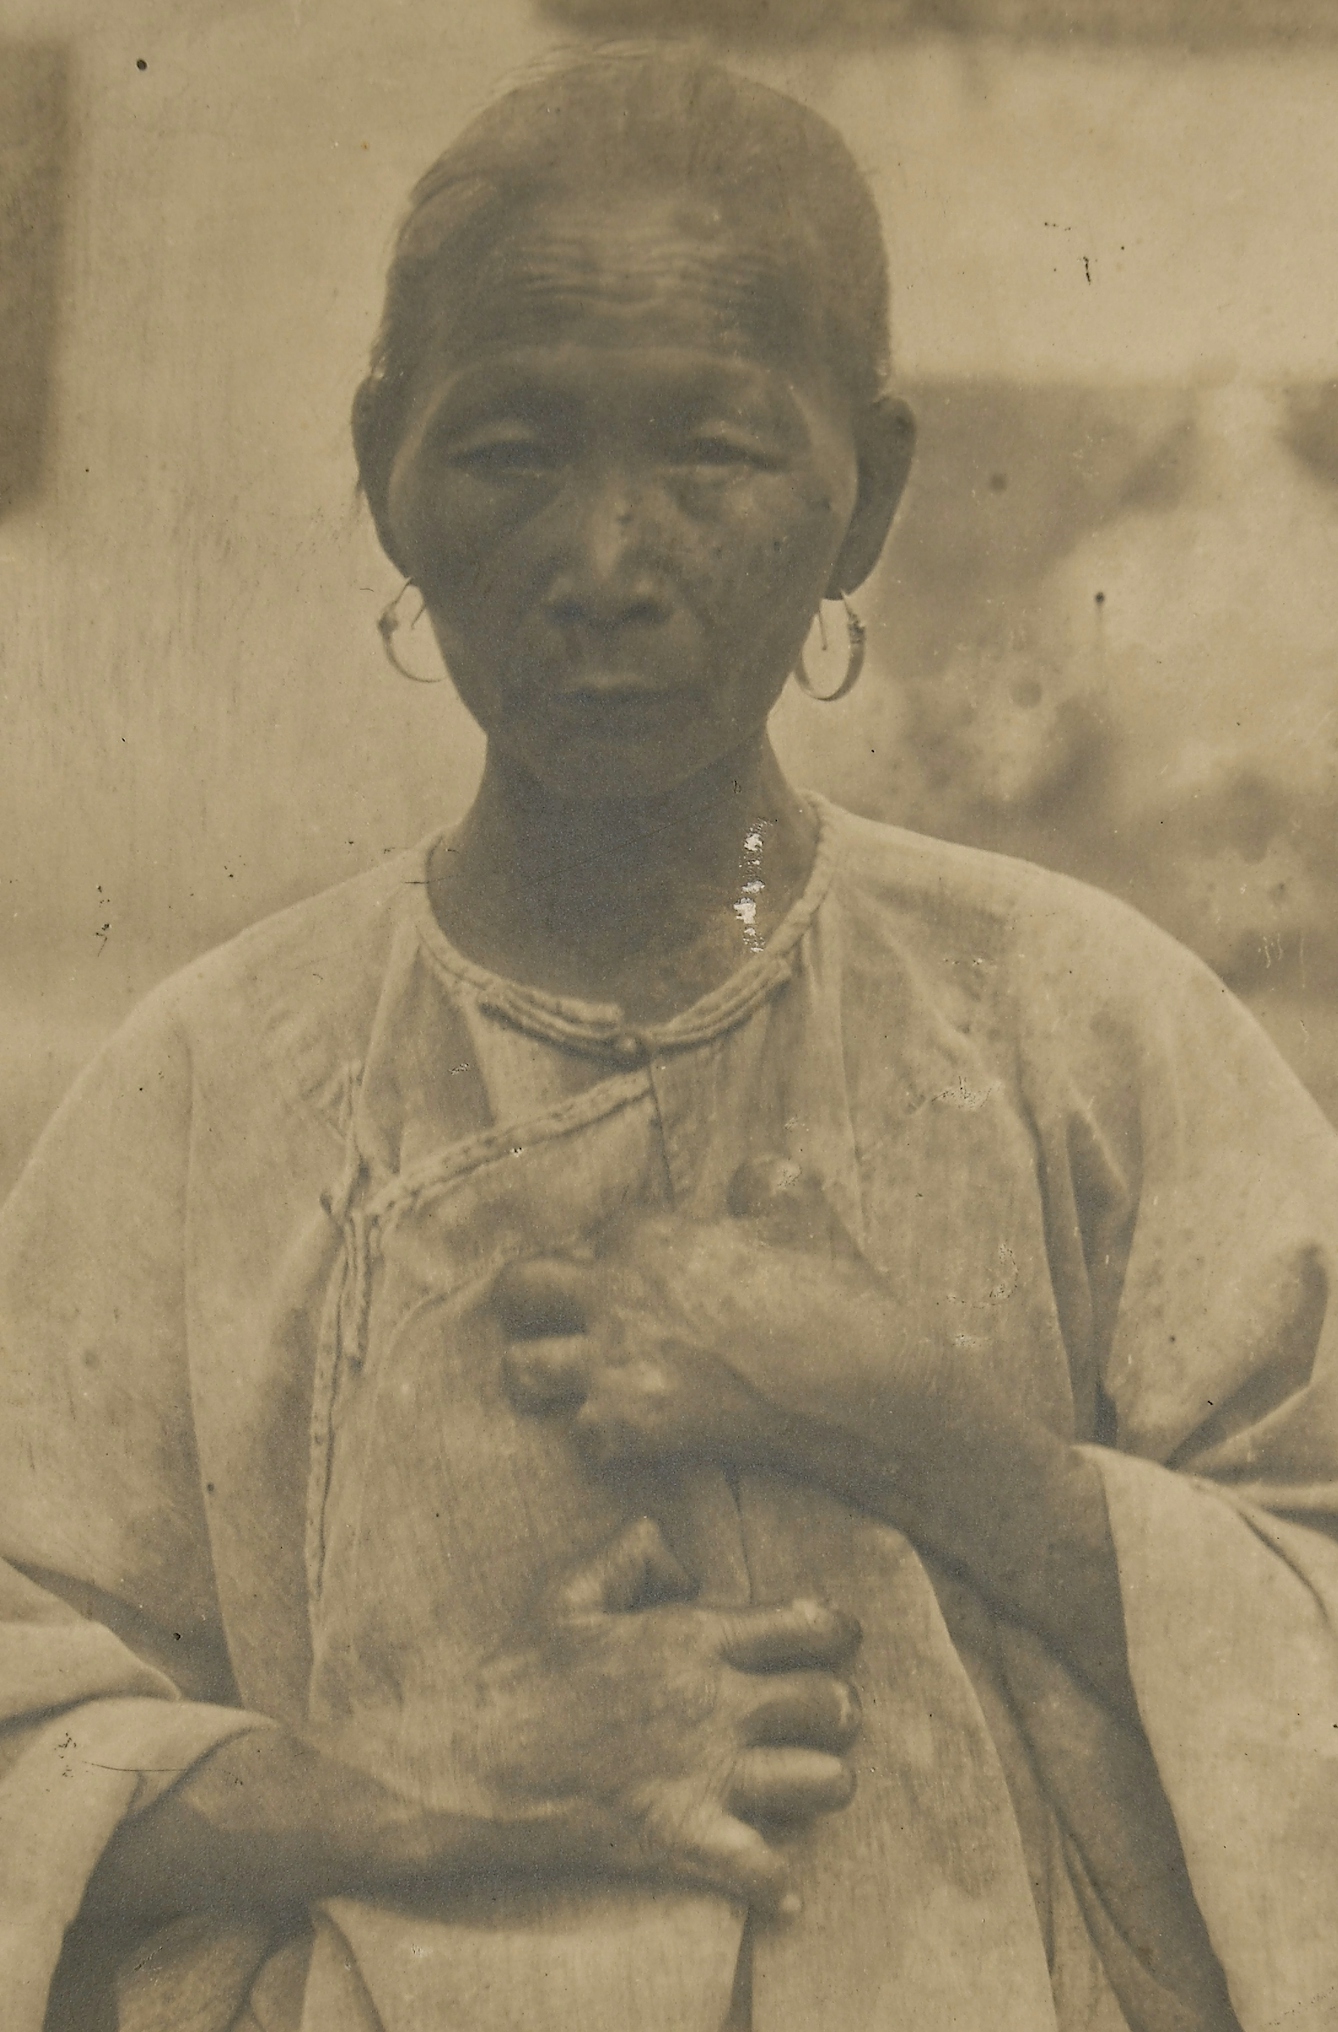 A Chinese woman suffering from leprosy